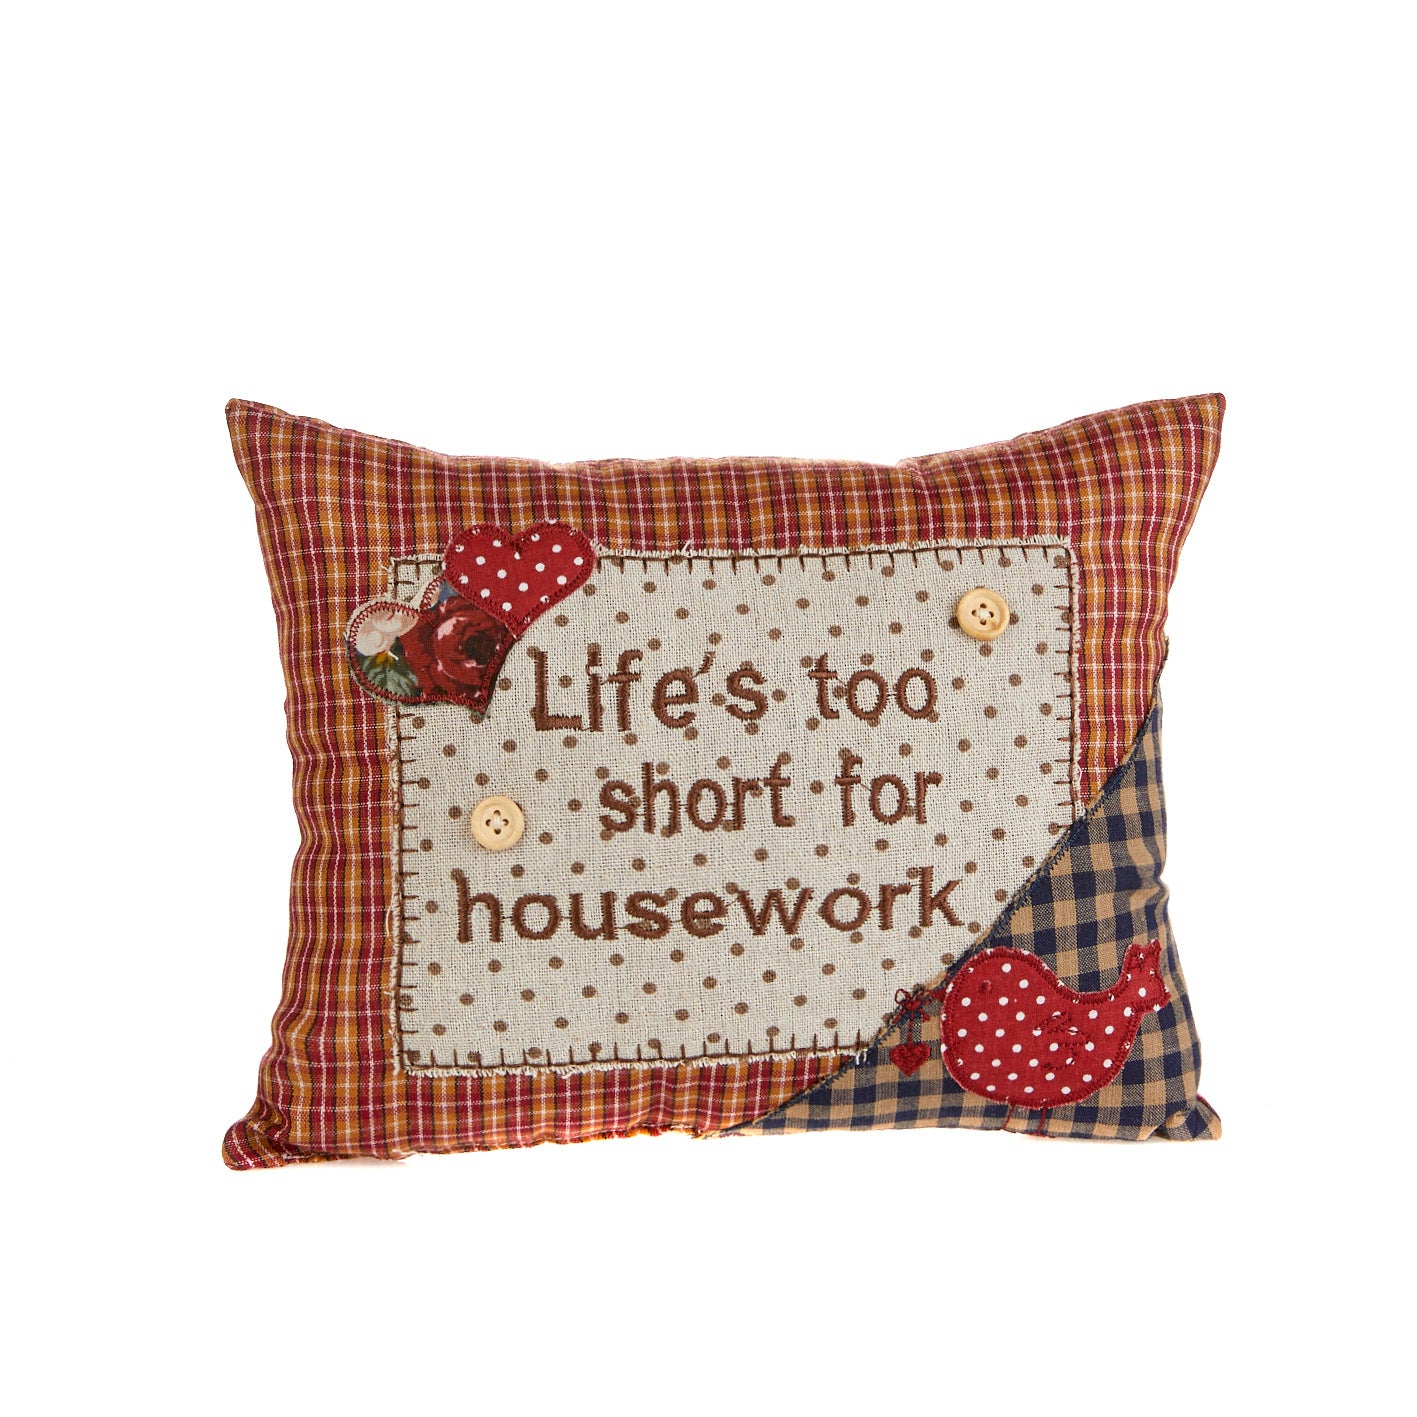 Life's Too Short for Housework Cushion